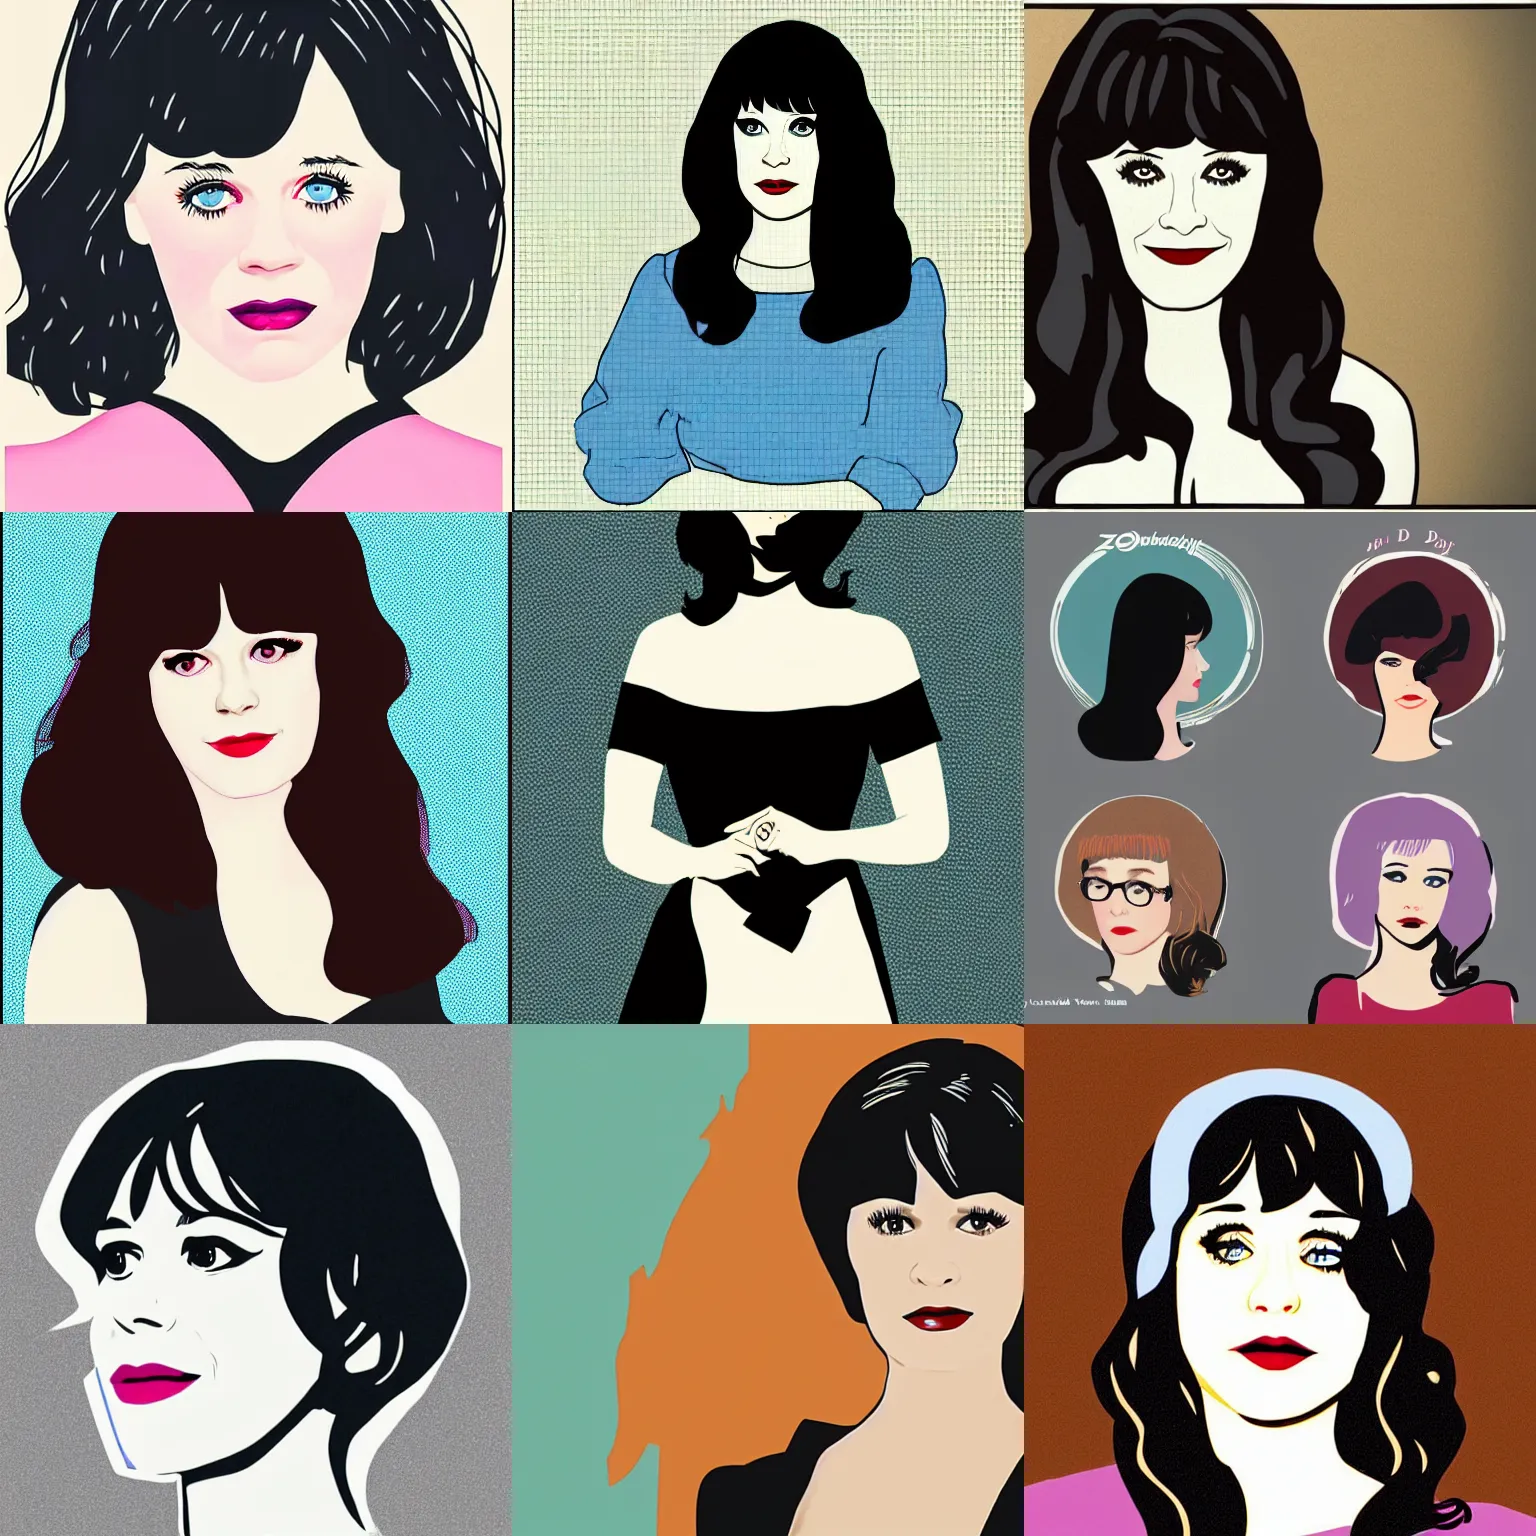 Prompt: zooey deschanel in the style of patrick nagel